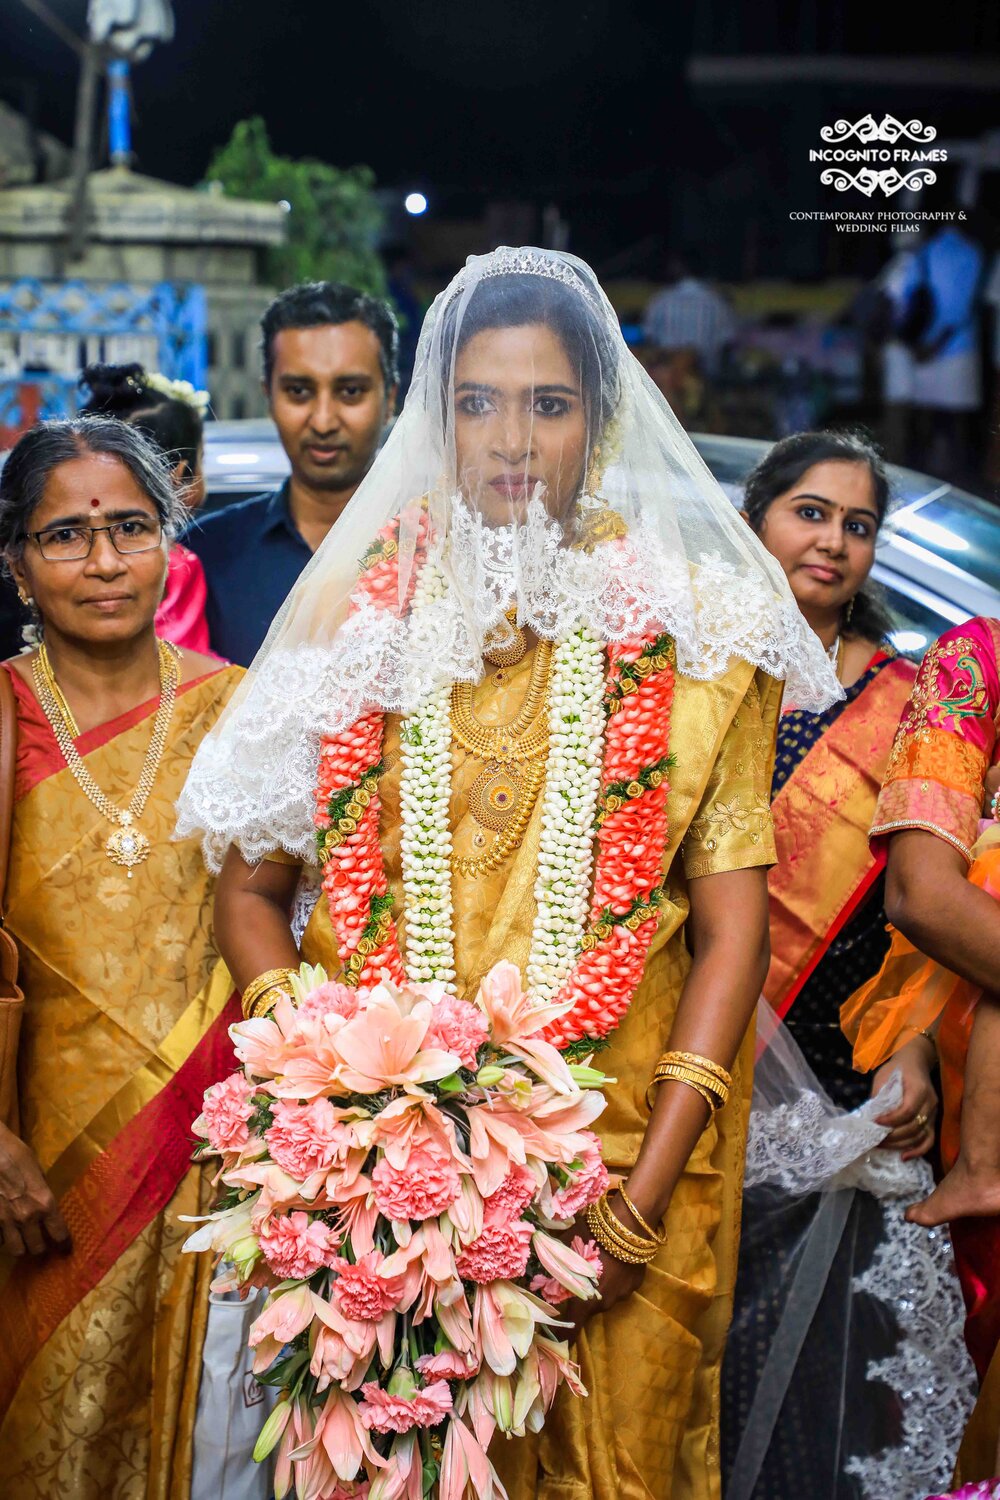 Christian Wedding — Wedding photography and blogs on Indian ...